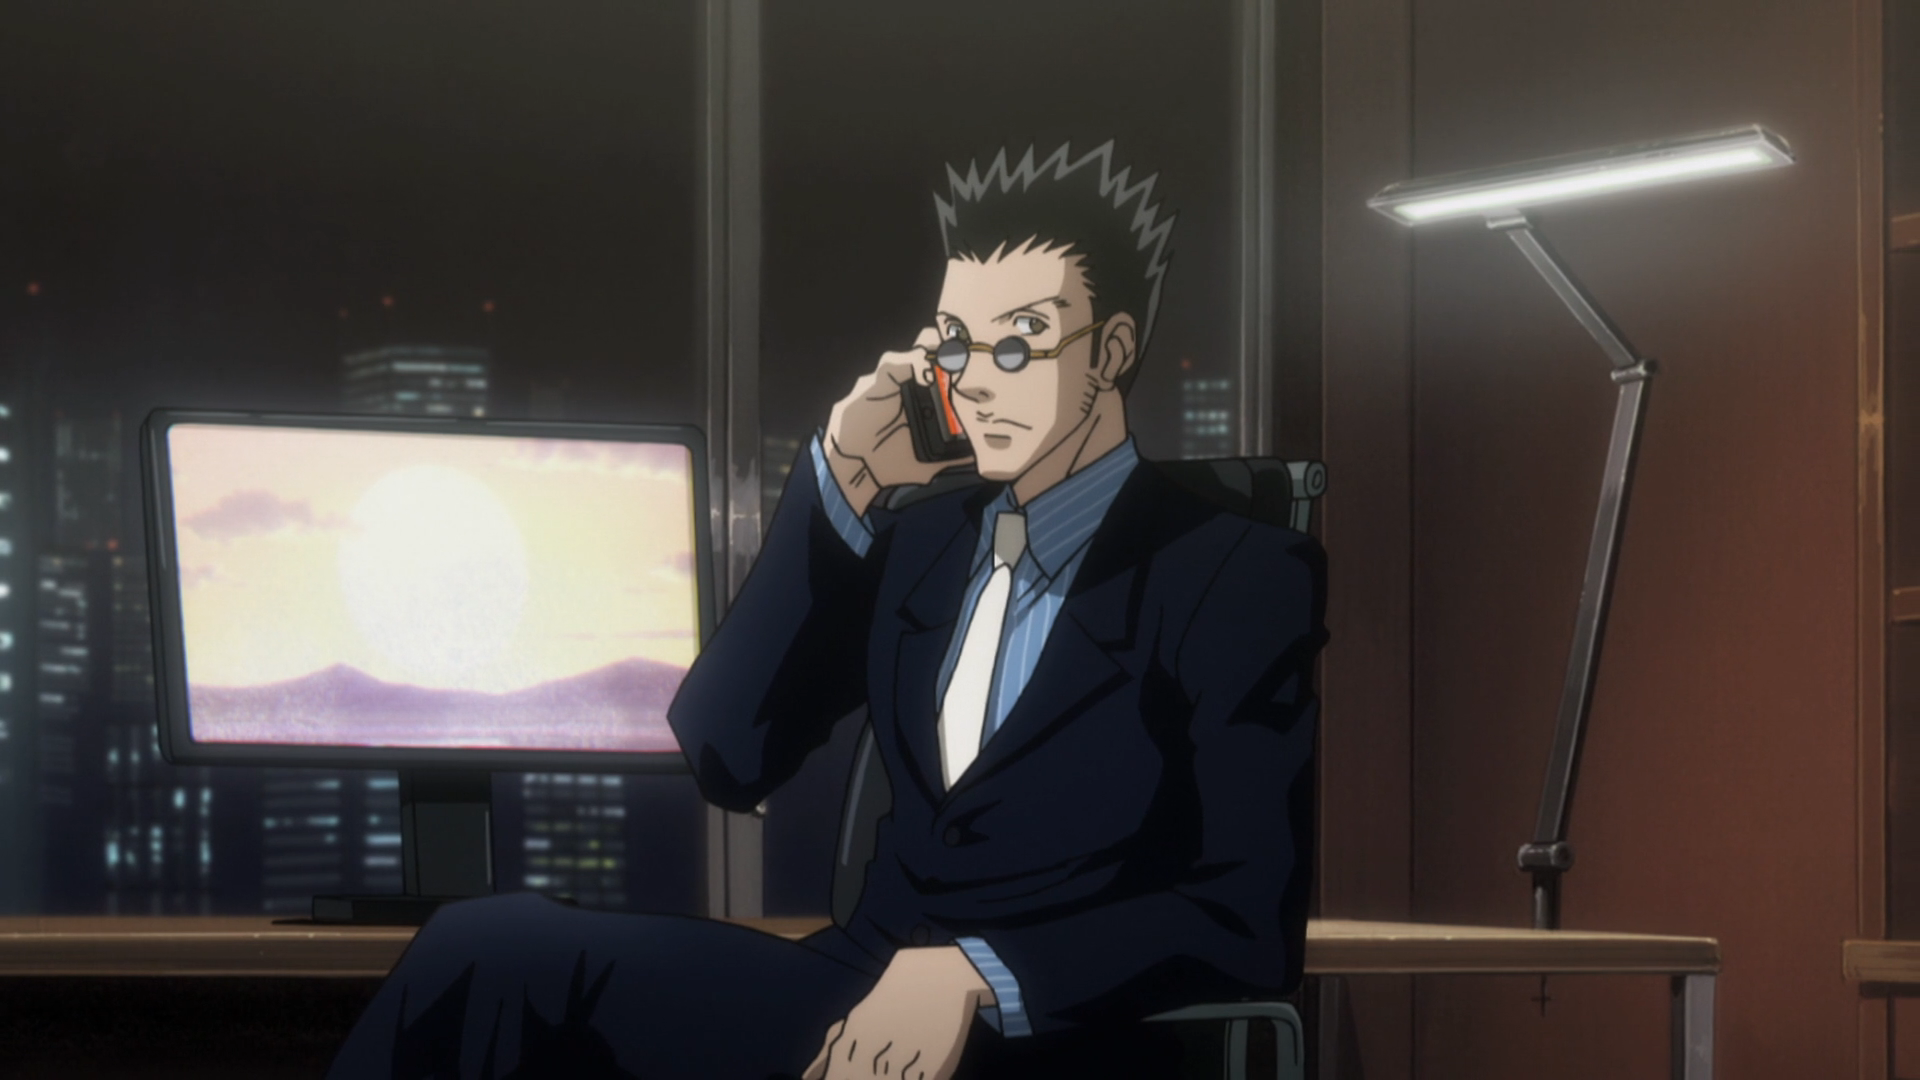 Any Leorio fans looking for a simple desktop wallpaper? I snagged